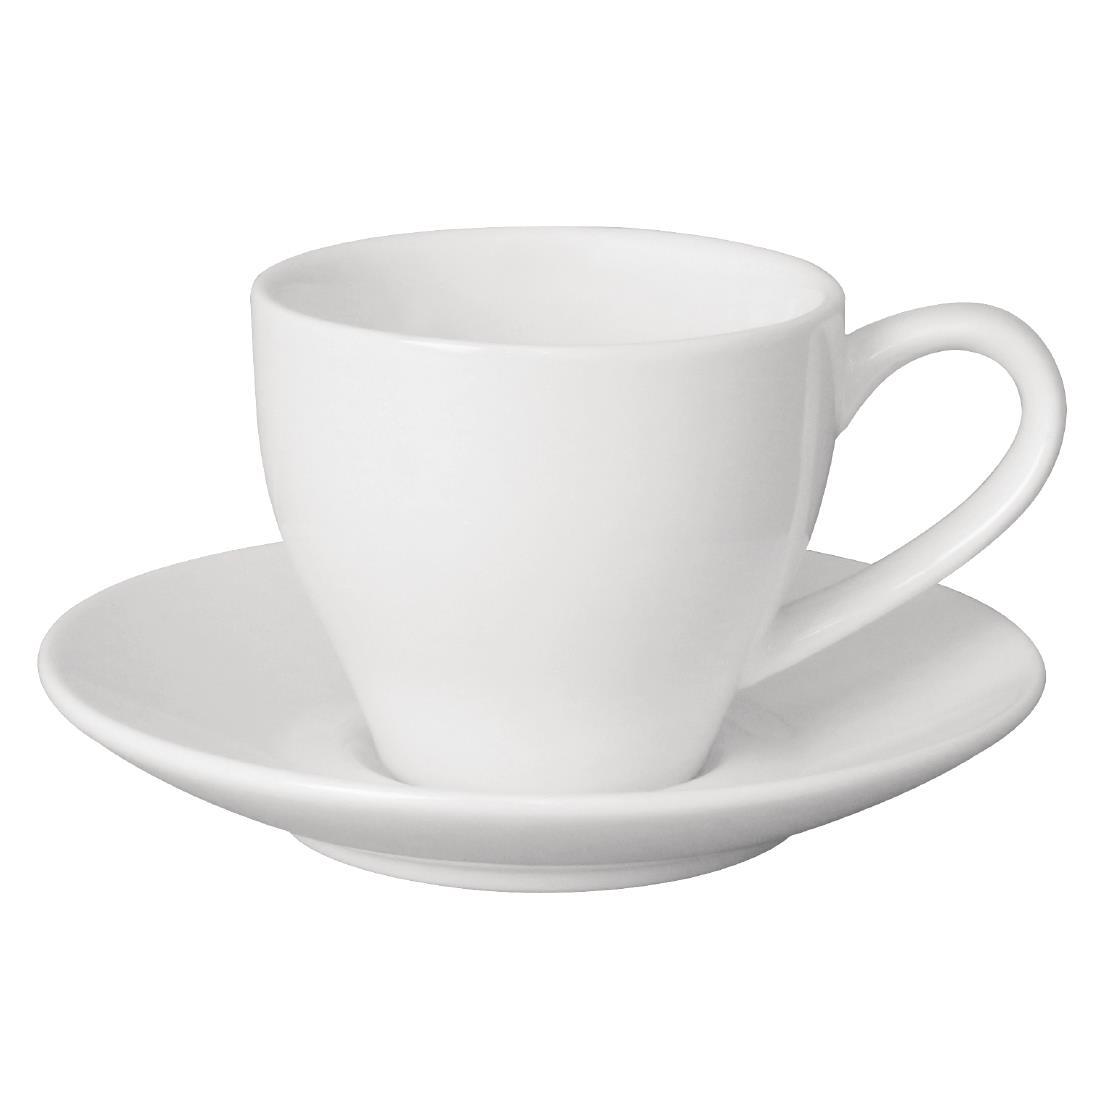 Olympia Cafe Espresso Saucers White 116.5mm (Pack of 12) - GK086  - 4